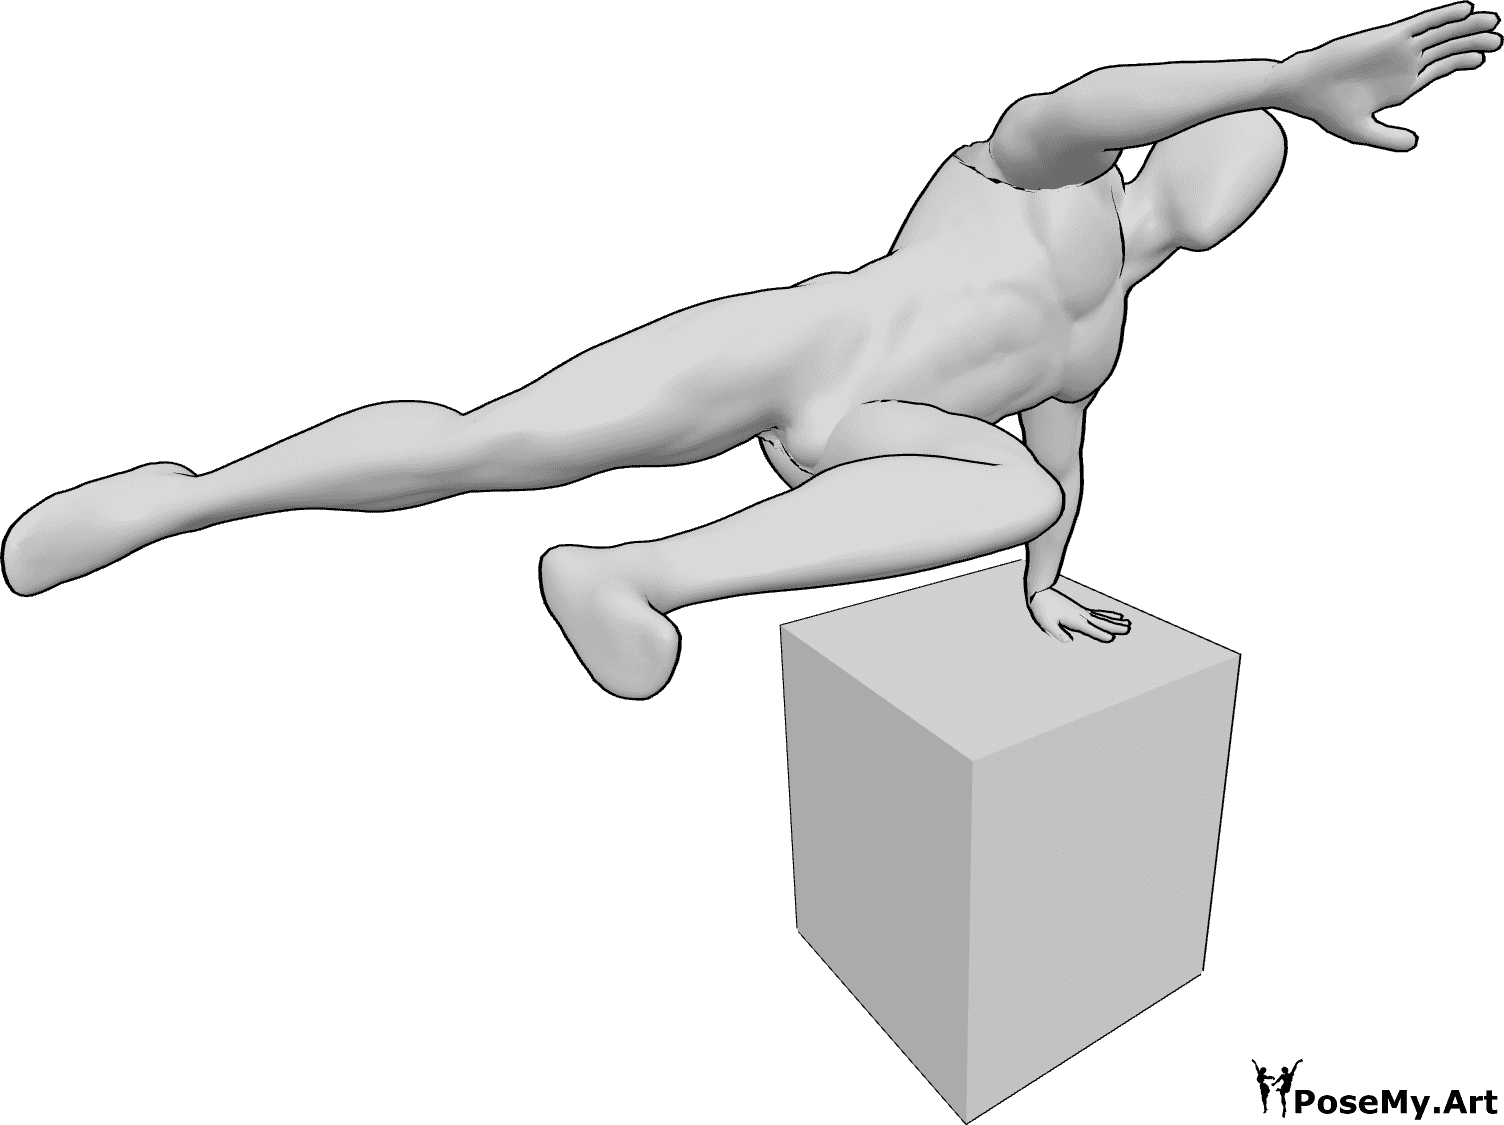 Pose Reference - Jumping around an obstacle - A realistic model jumping around an obstacle